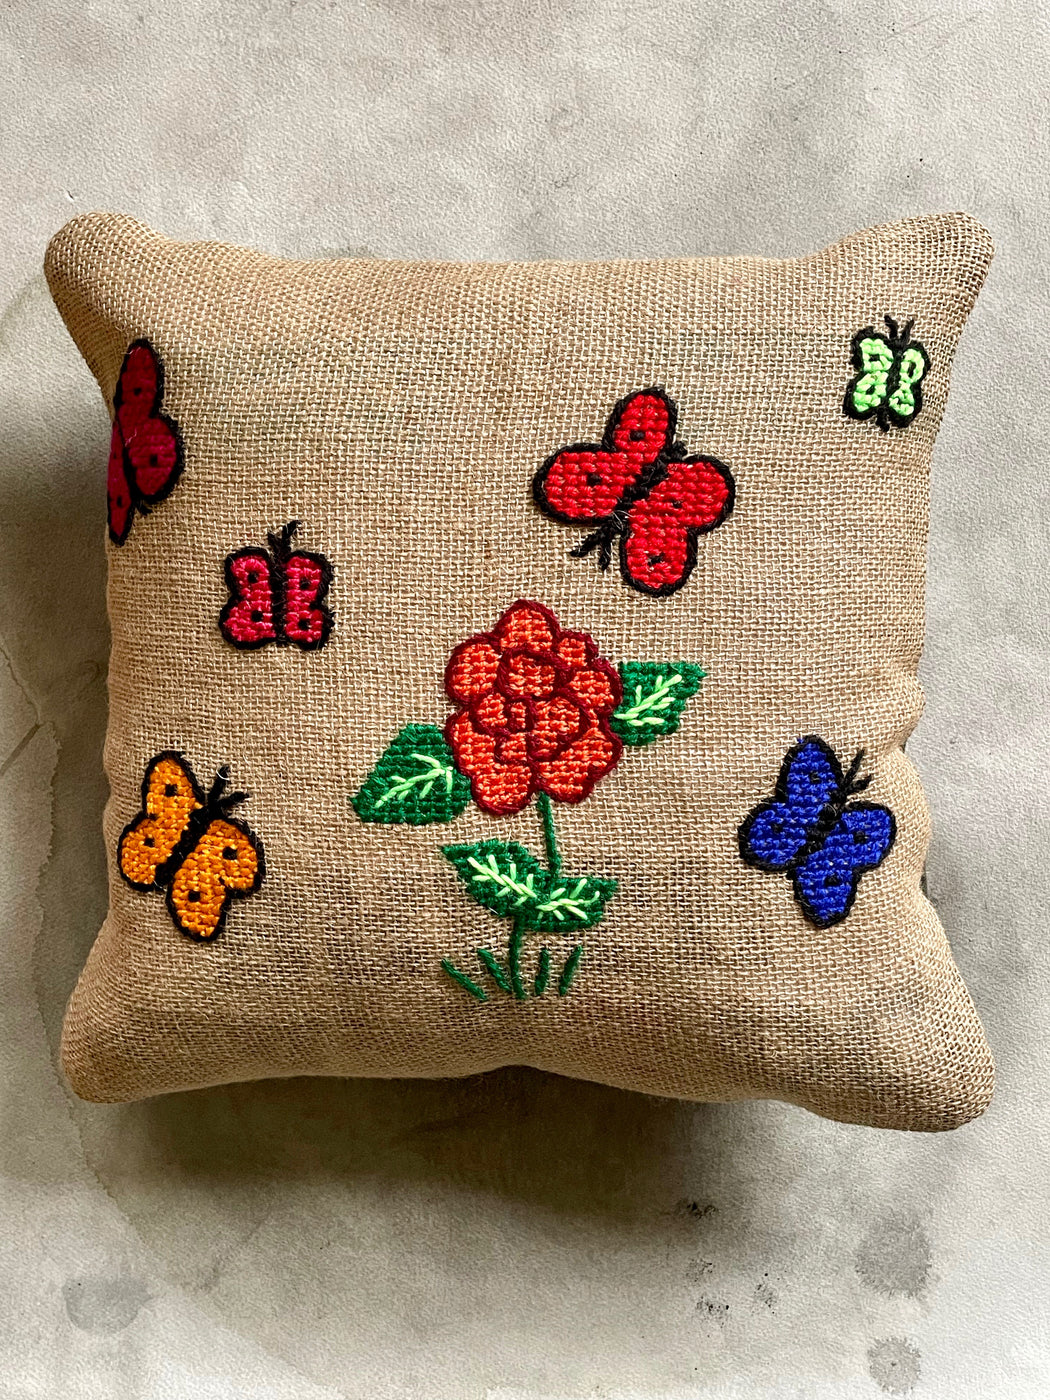 "Butterflies" Hand-Embroidered Pillow by Nathalie Lete